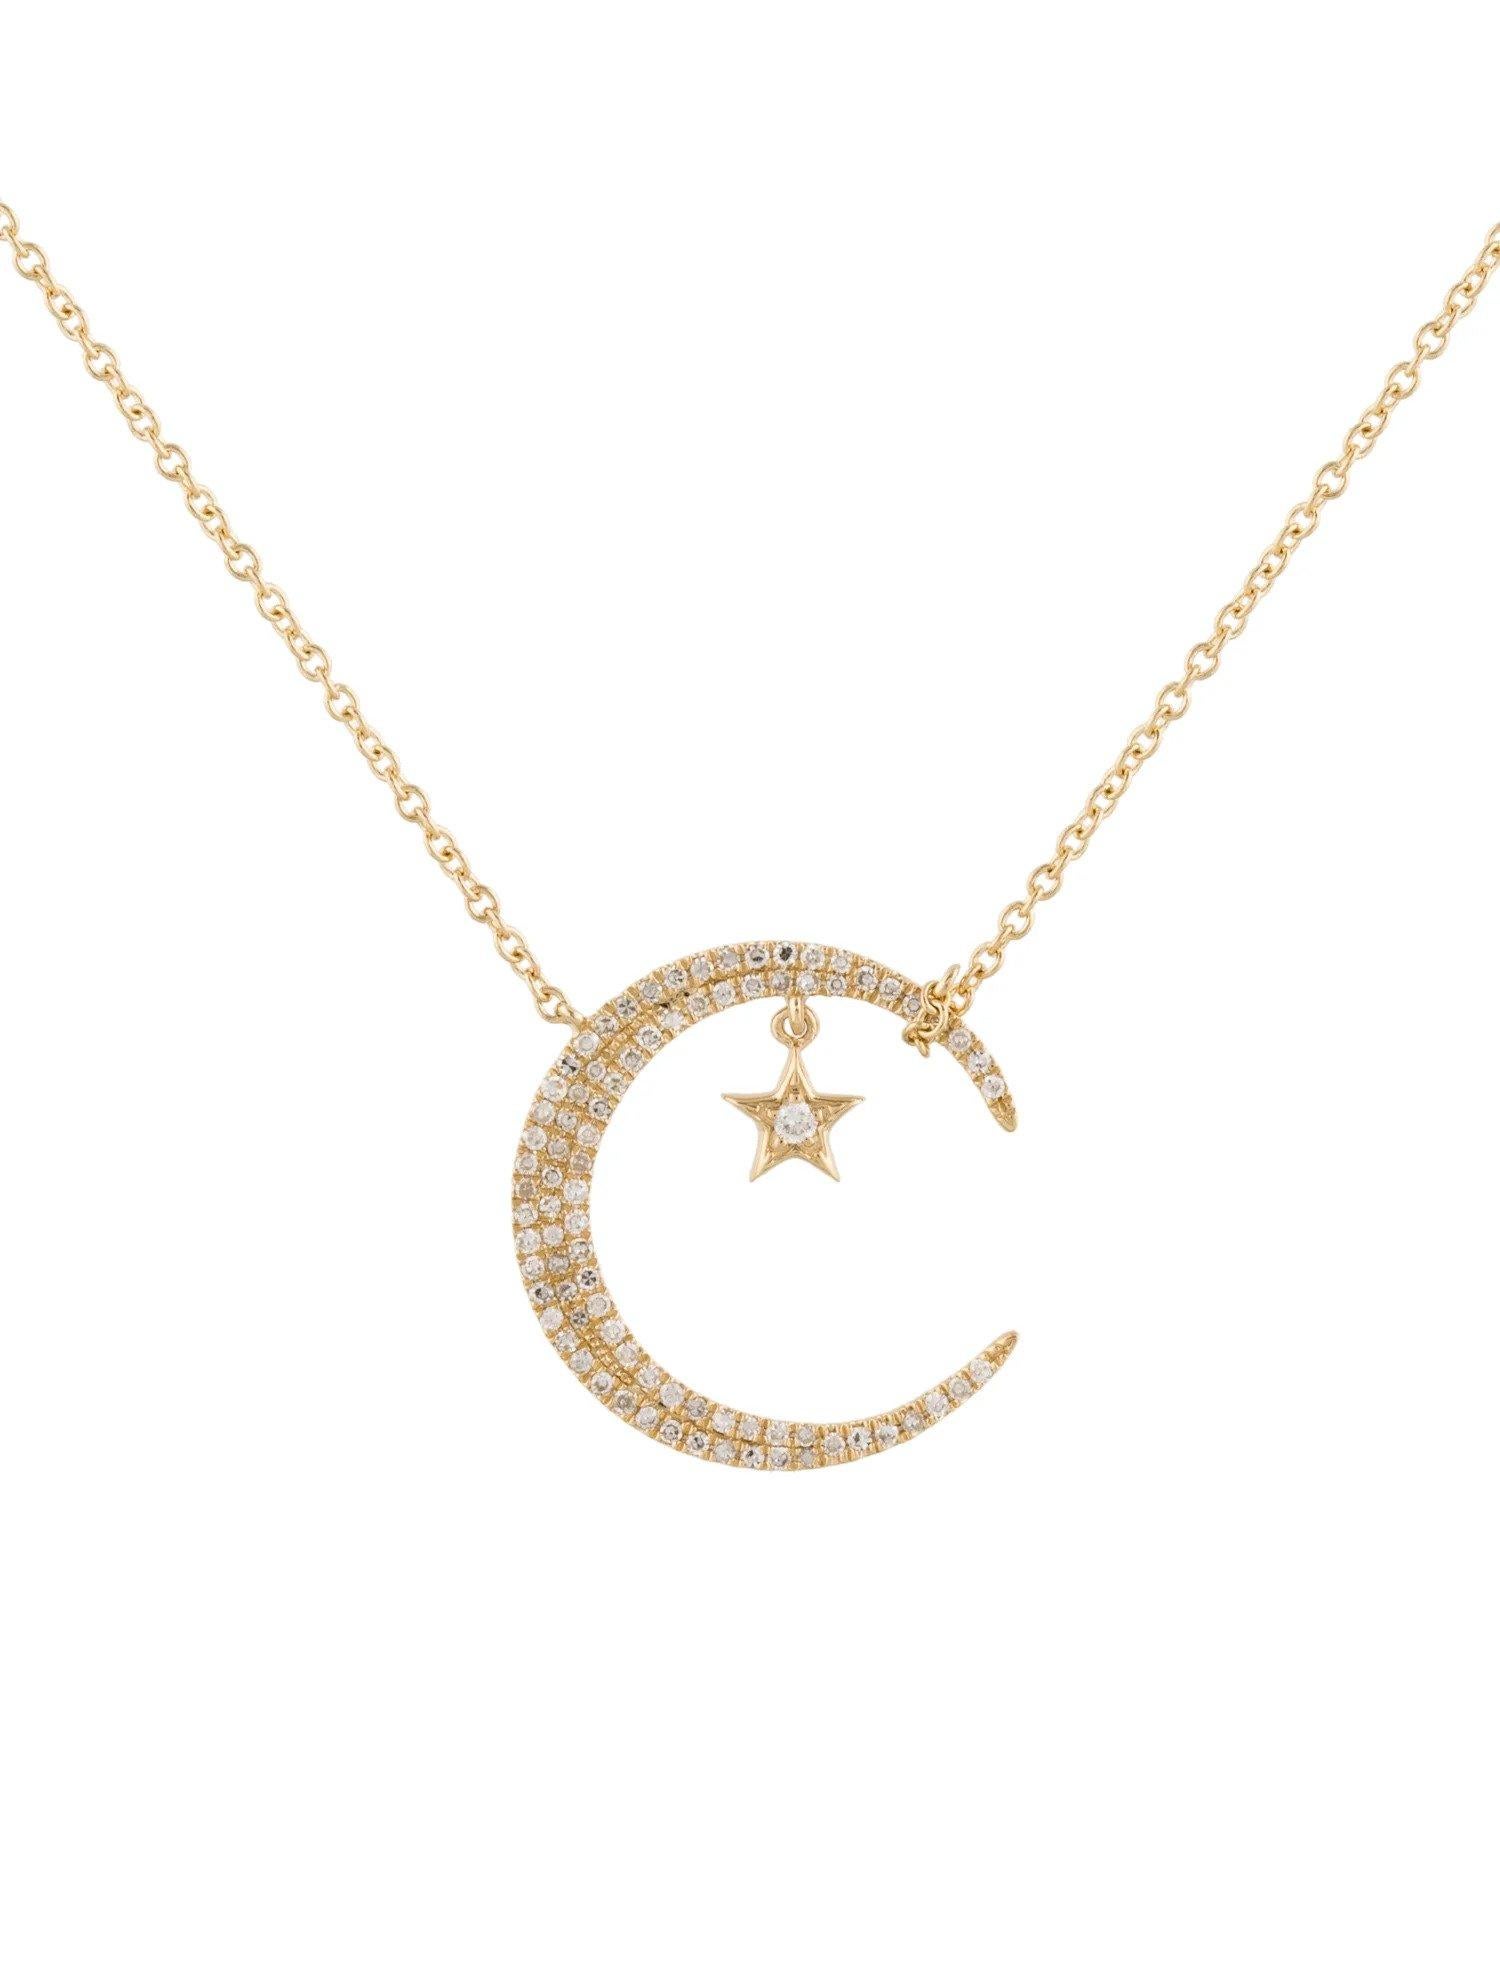 Round Cut 0.25 Carat Diamond Crescent Moon & Star Yellow Gold Pendant Necklace For Sale